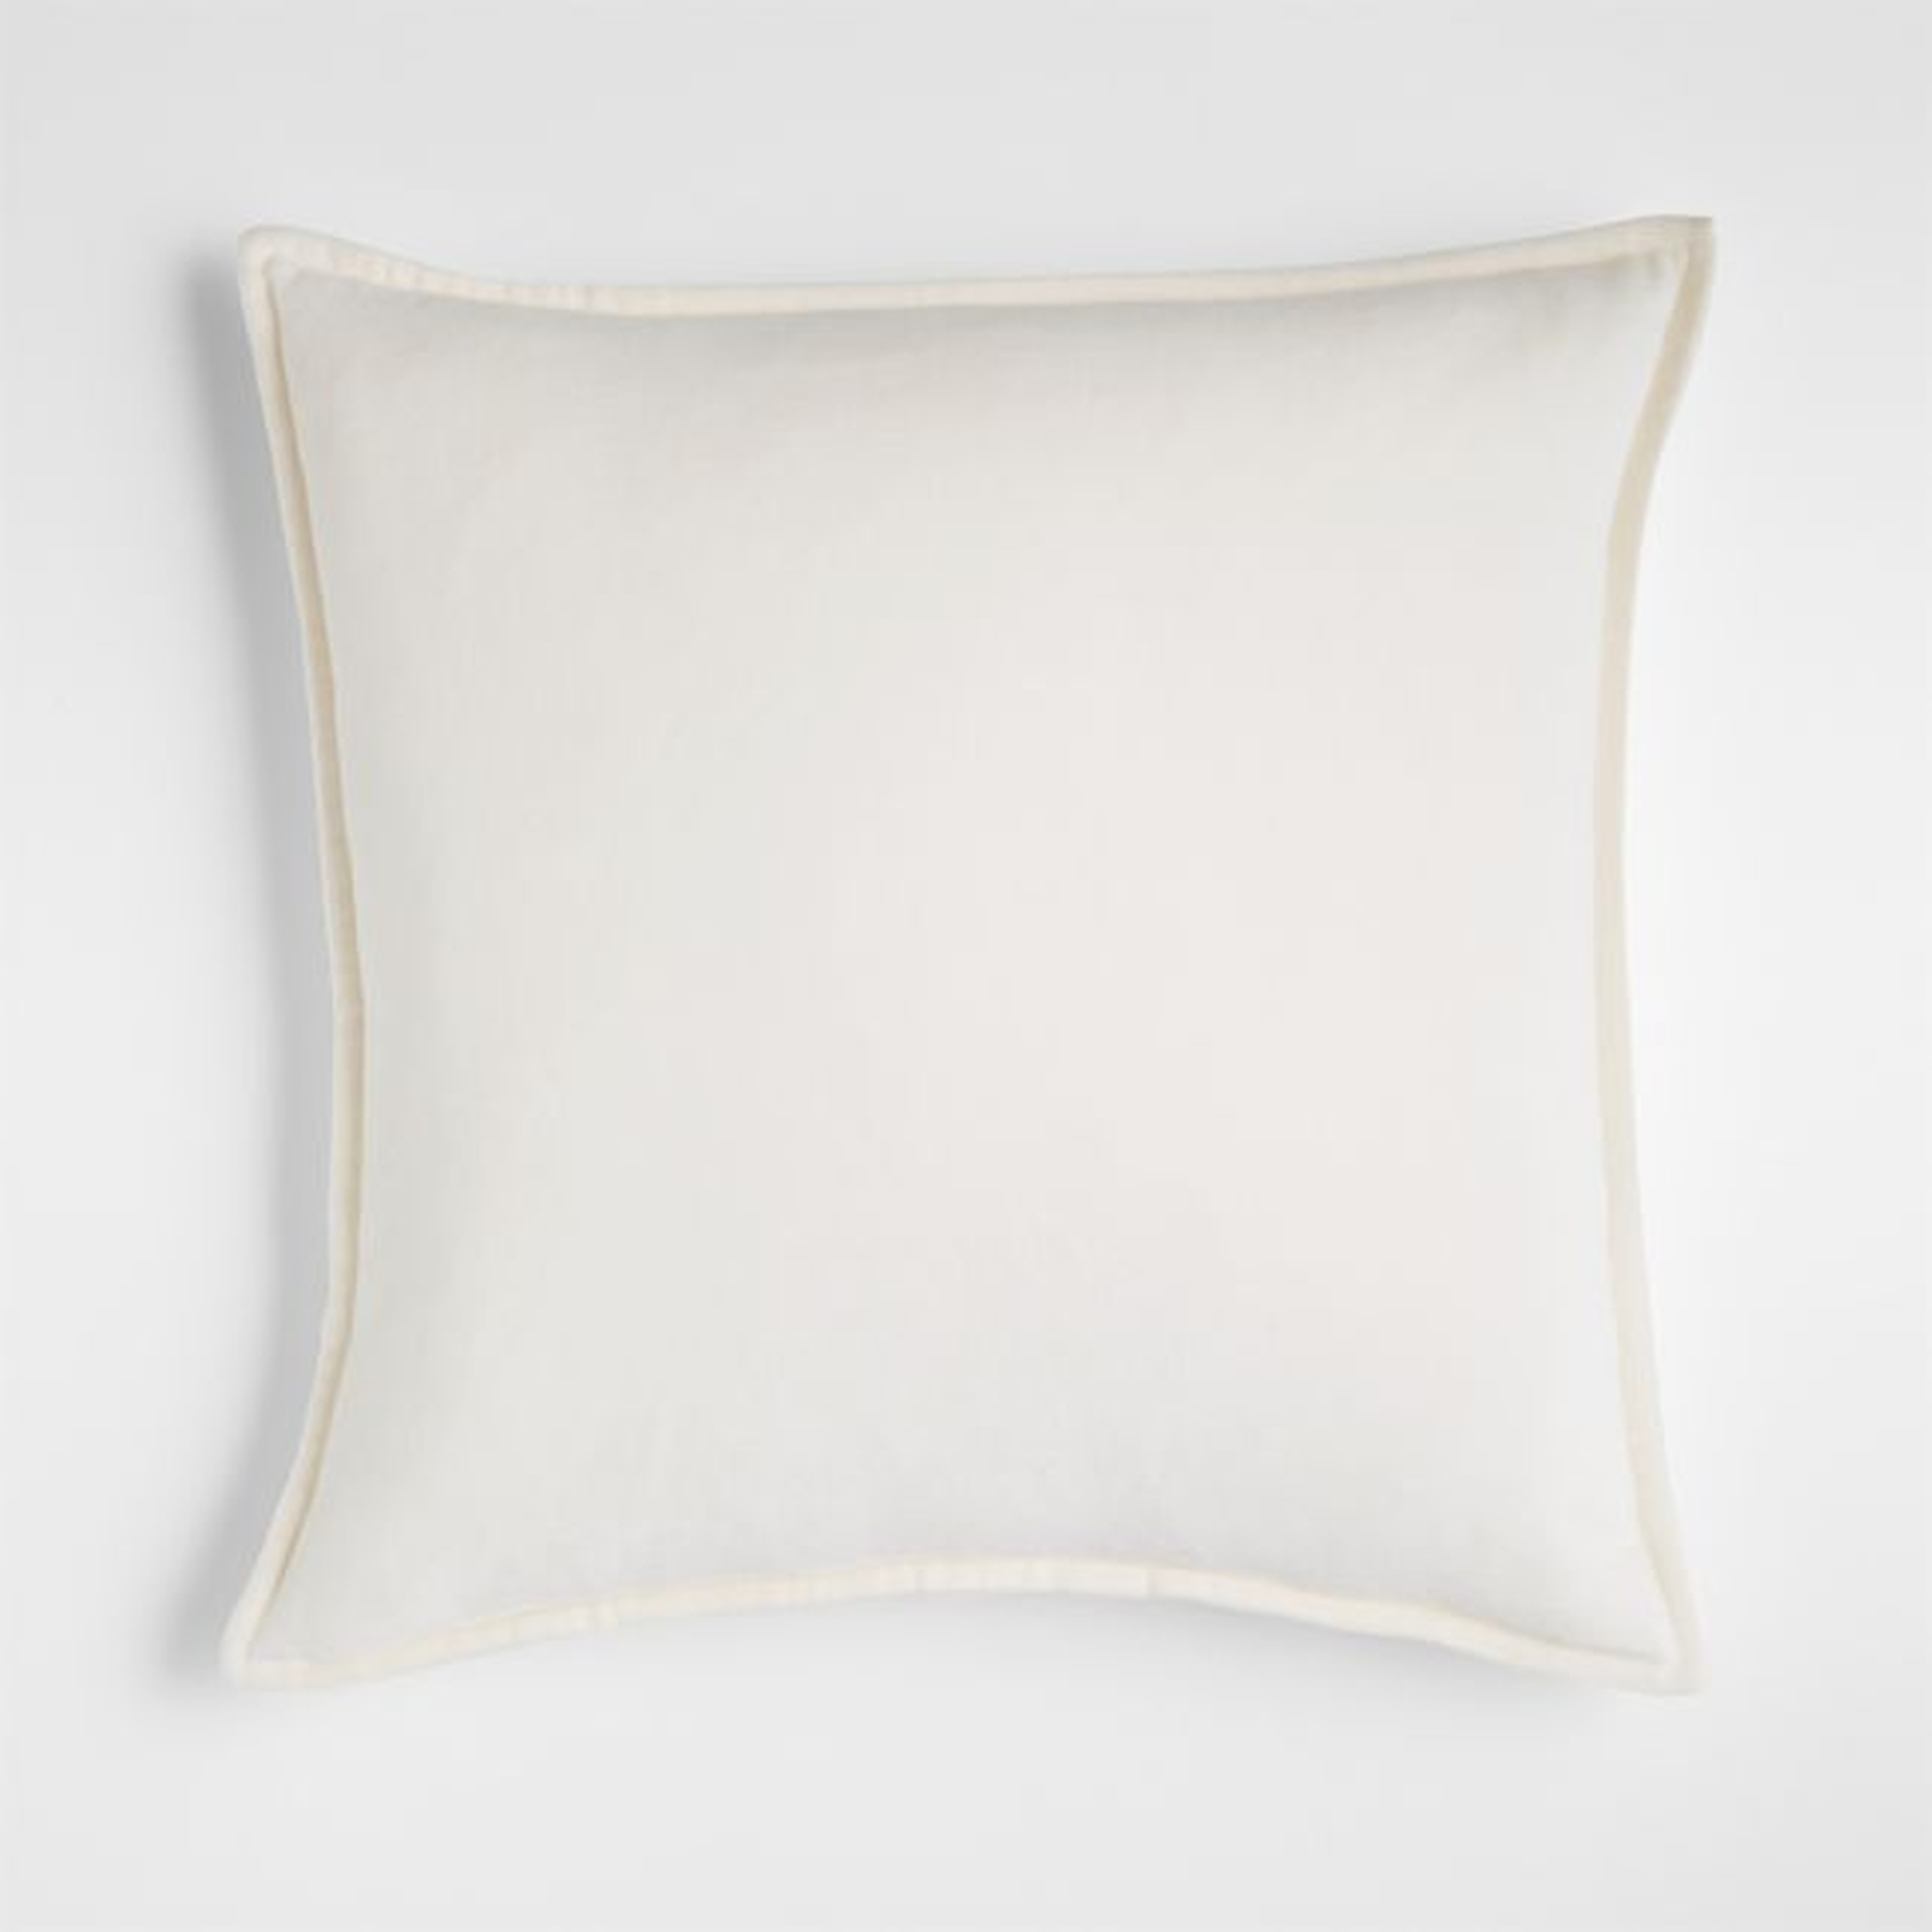 Ivory 20"x20" Washed Cotton Velvet Throw Pillow Cover - Crate and Barrel